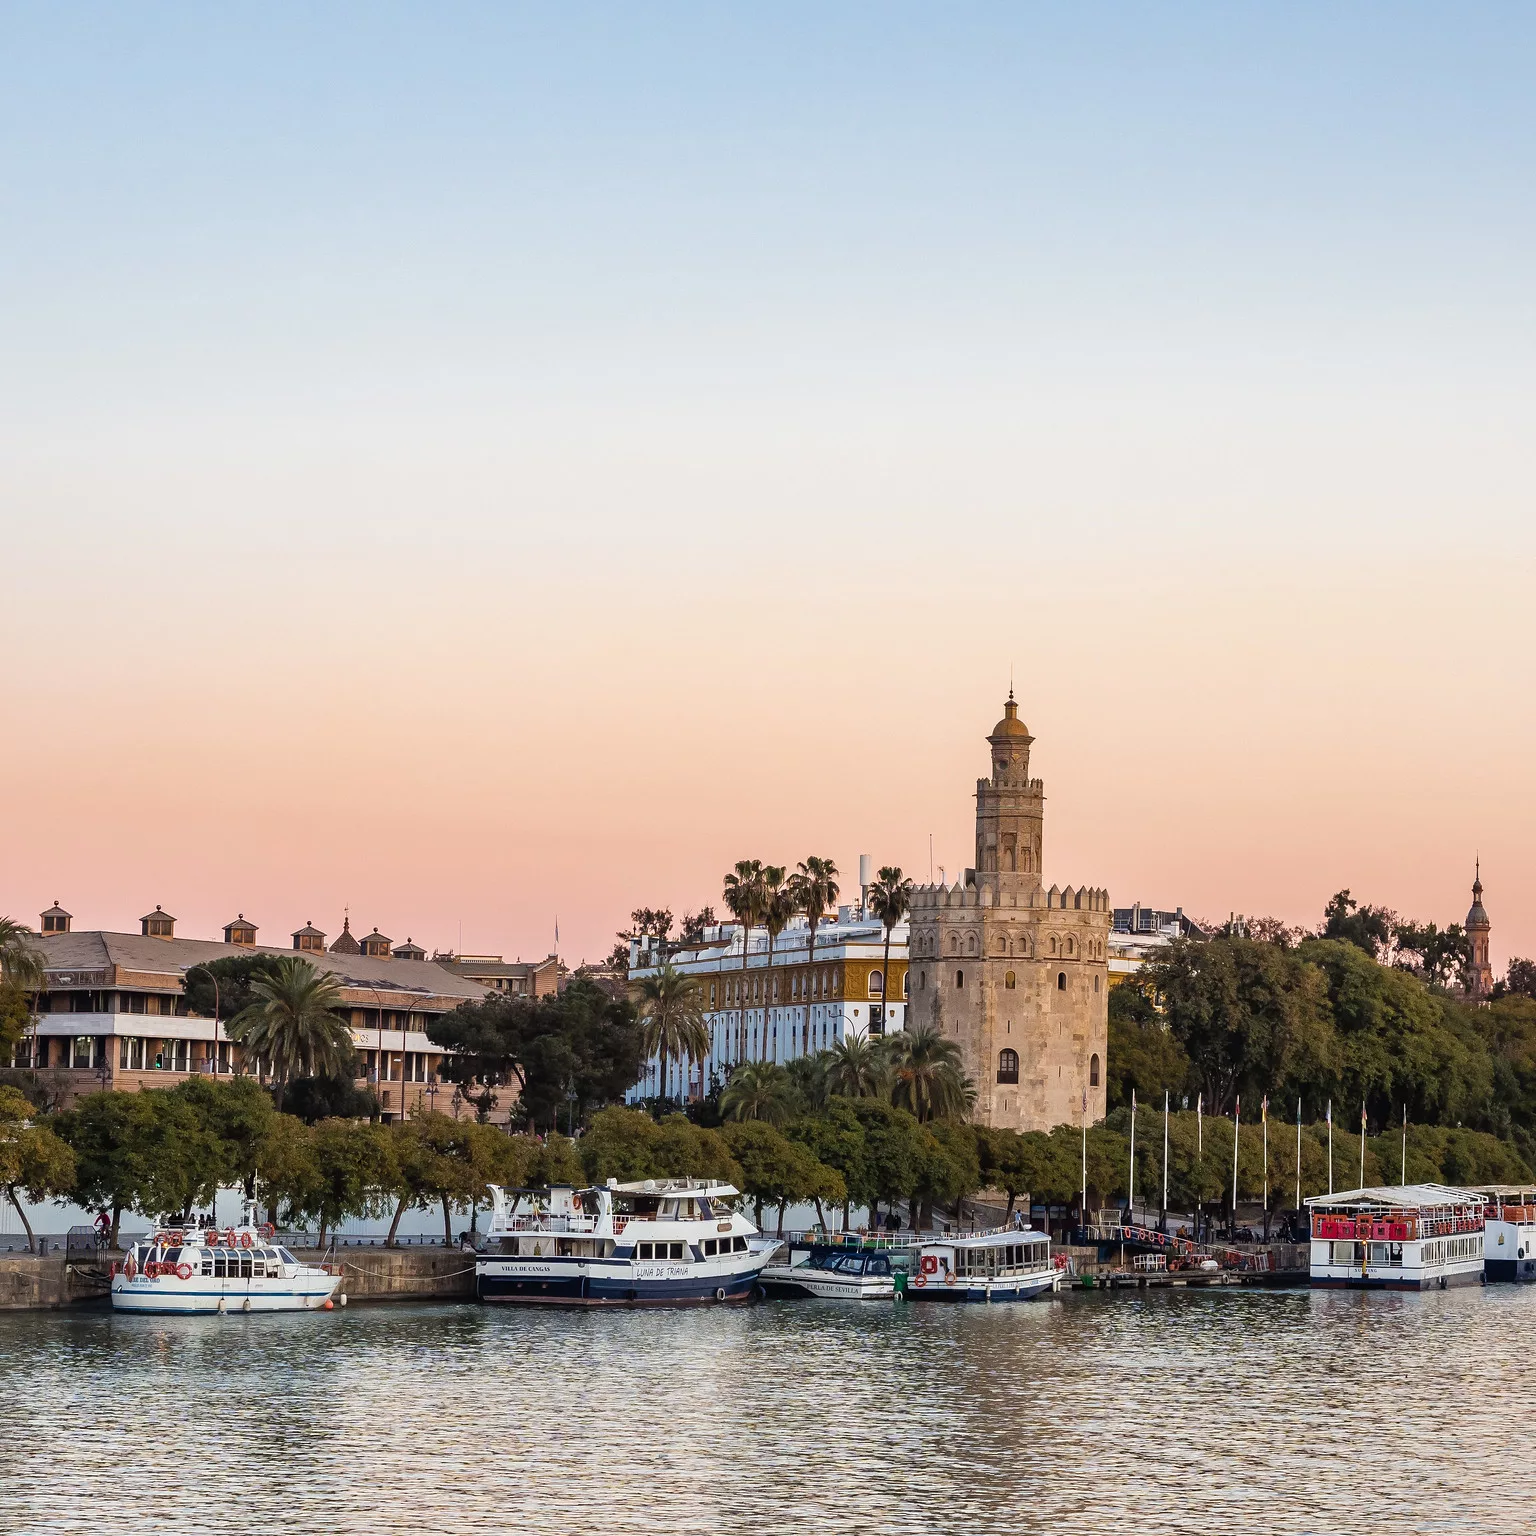 The Gold Tower (Torre del Oro) was part of Seville’s defenses on the Guadalquivir, built in the Almohad period, with additions in the 14th and 18th centuries.